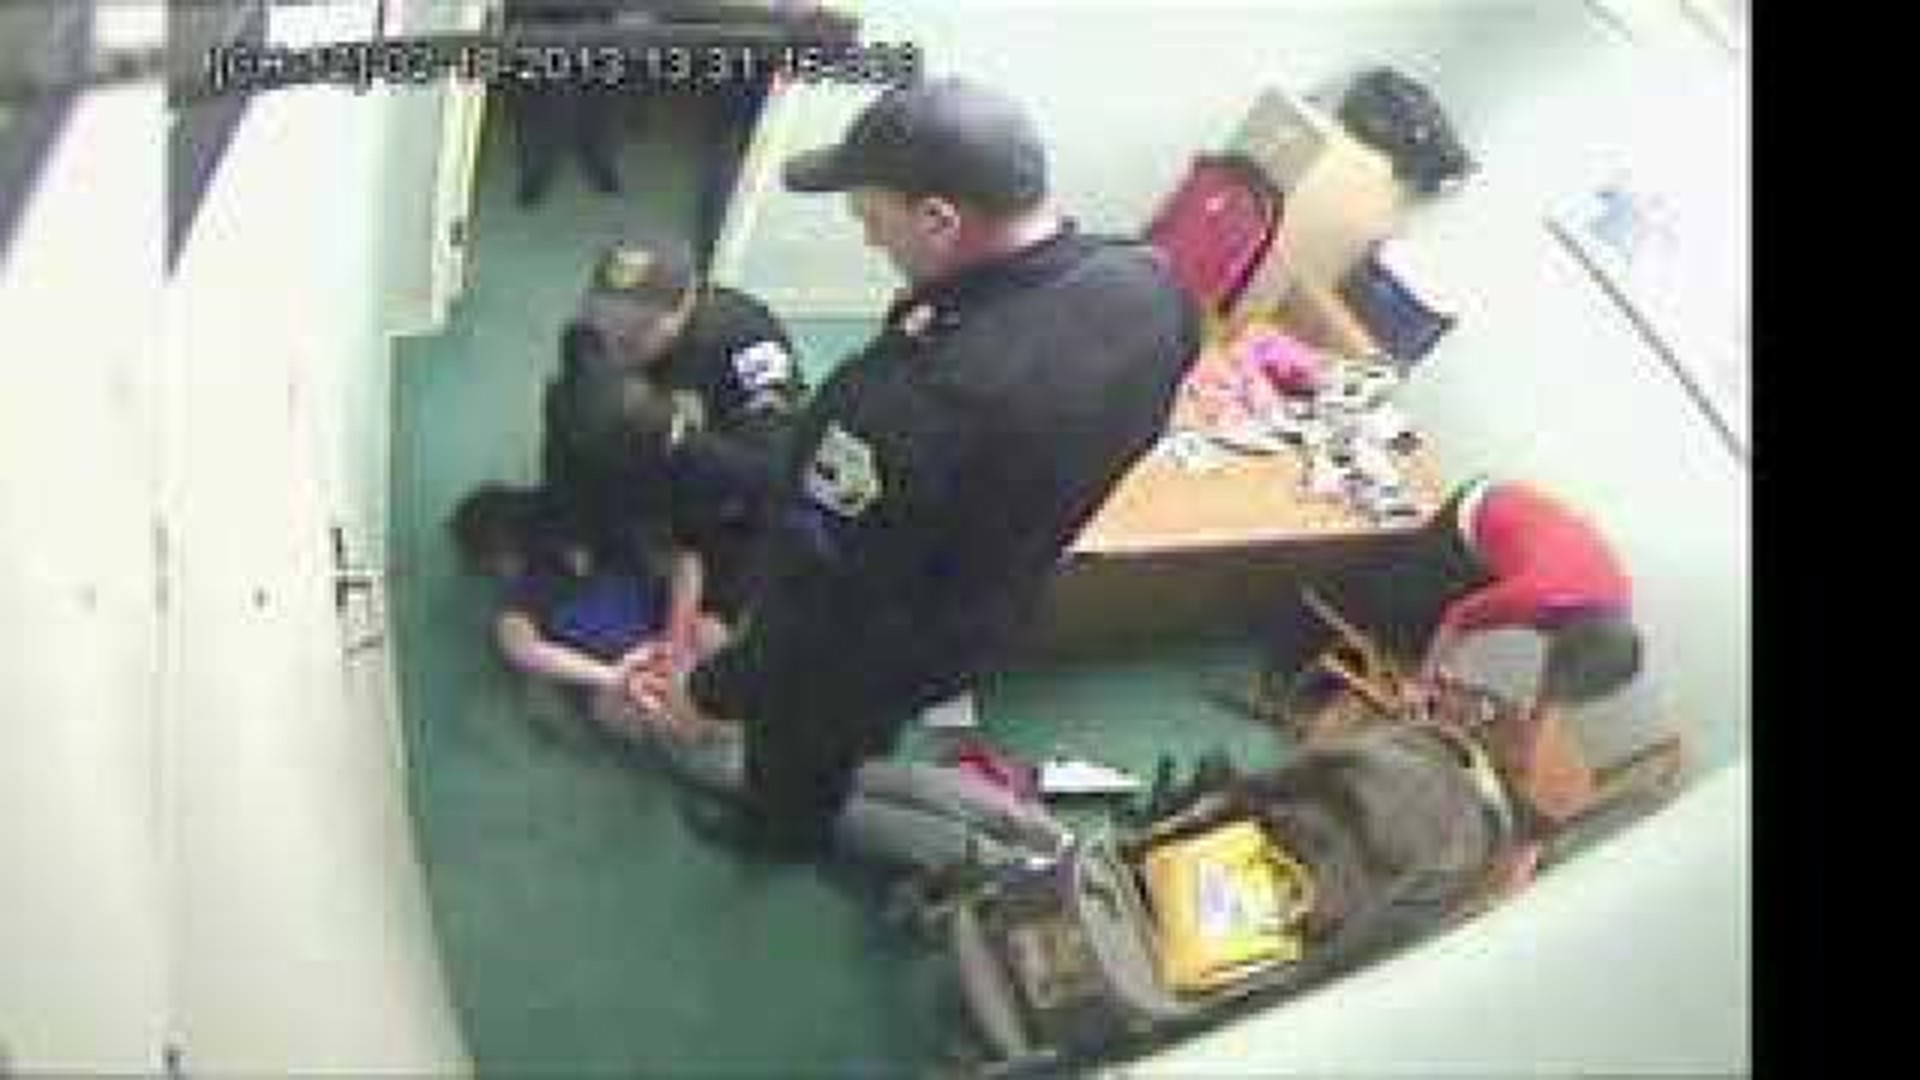 Extended video of Davenport Police altercation with shoplifting suspect